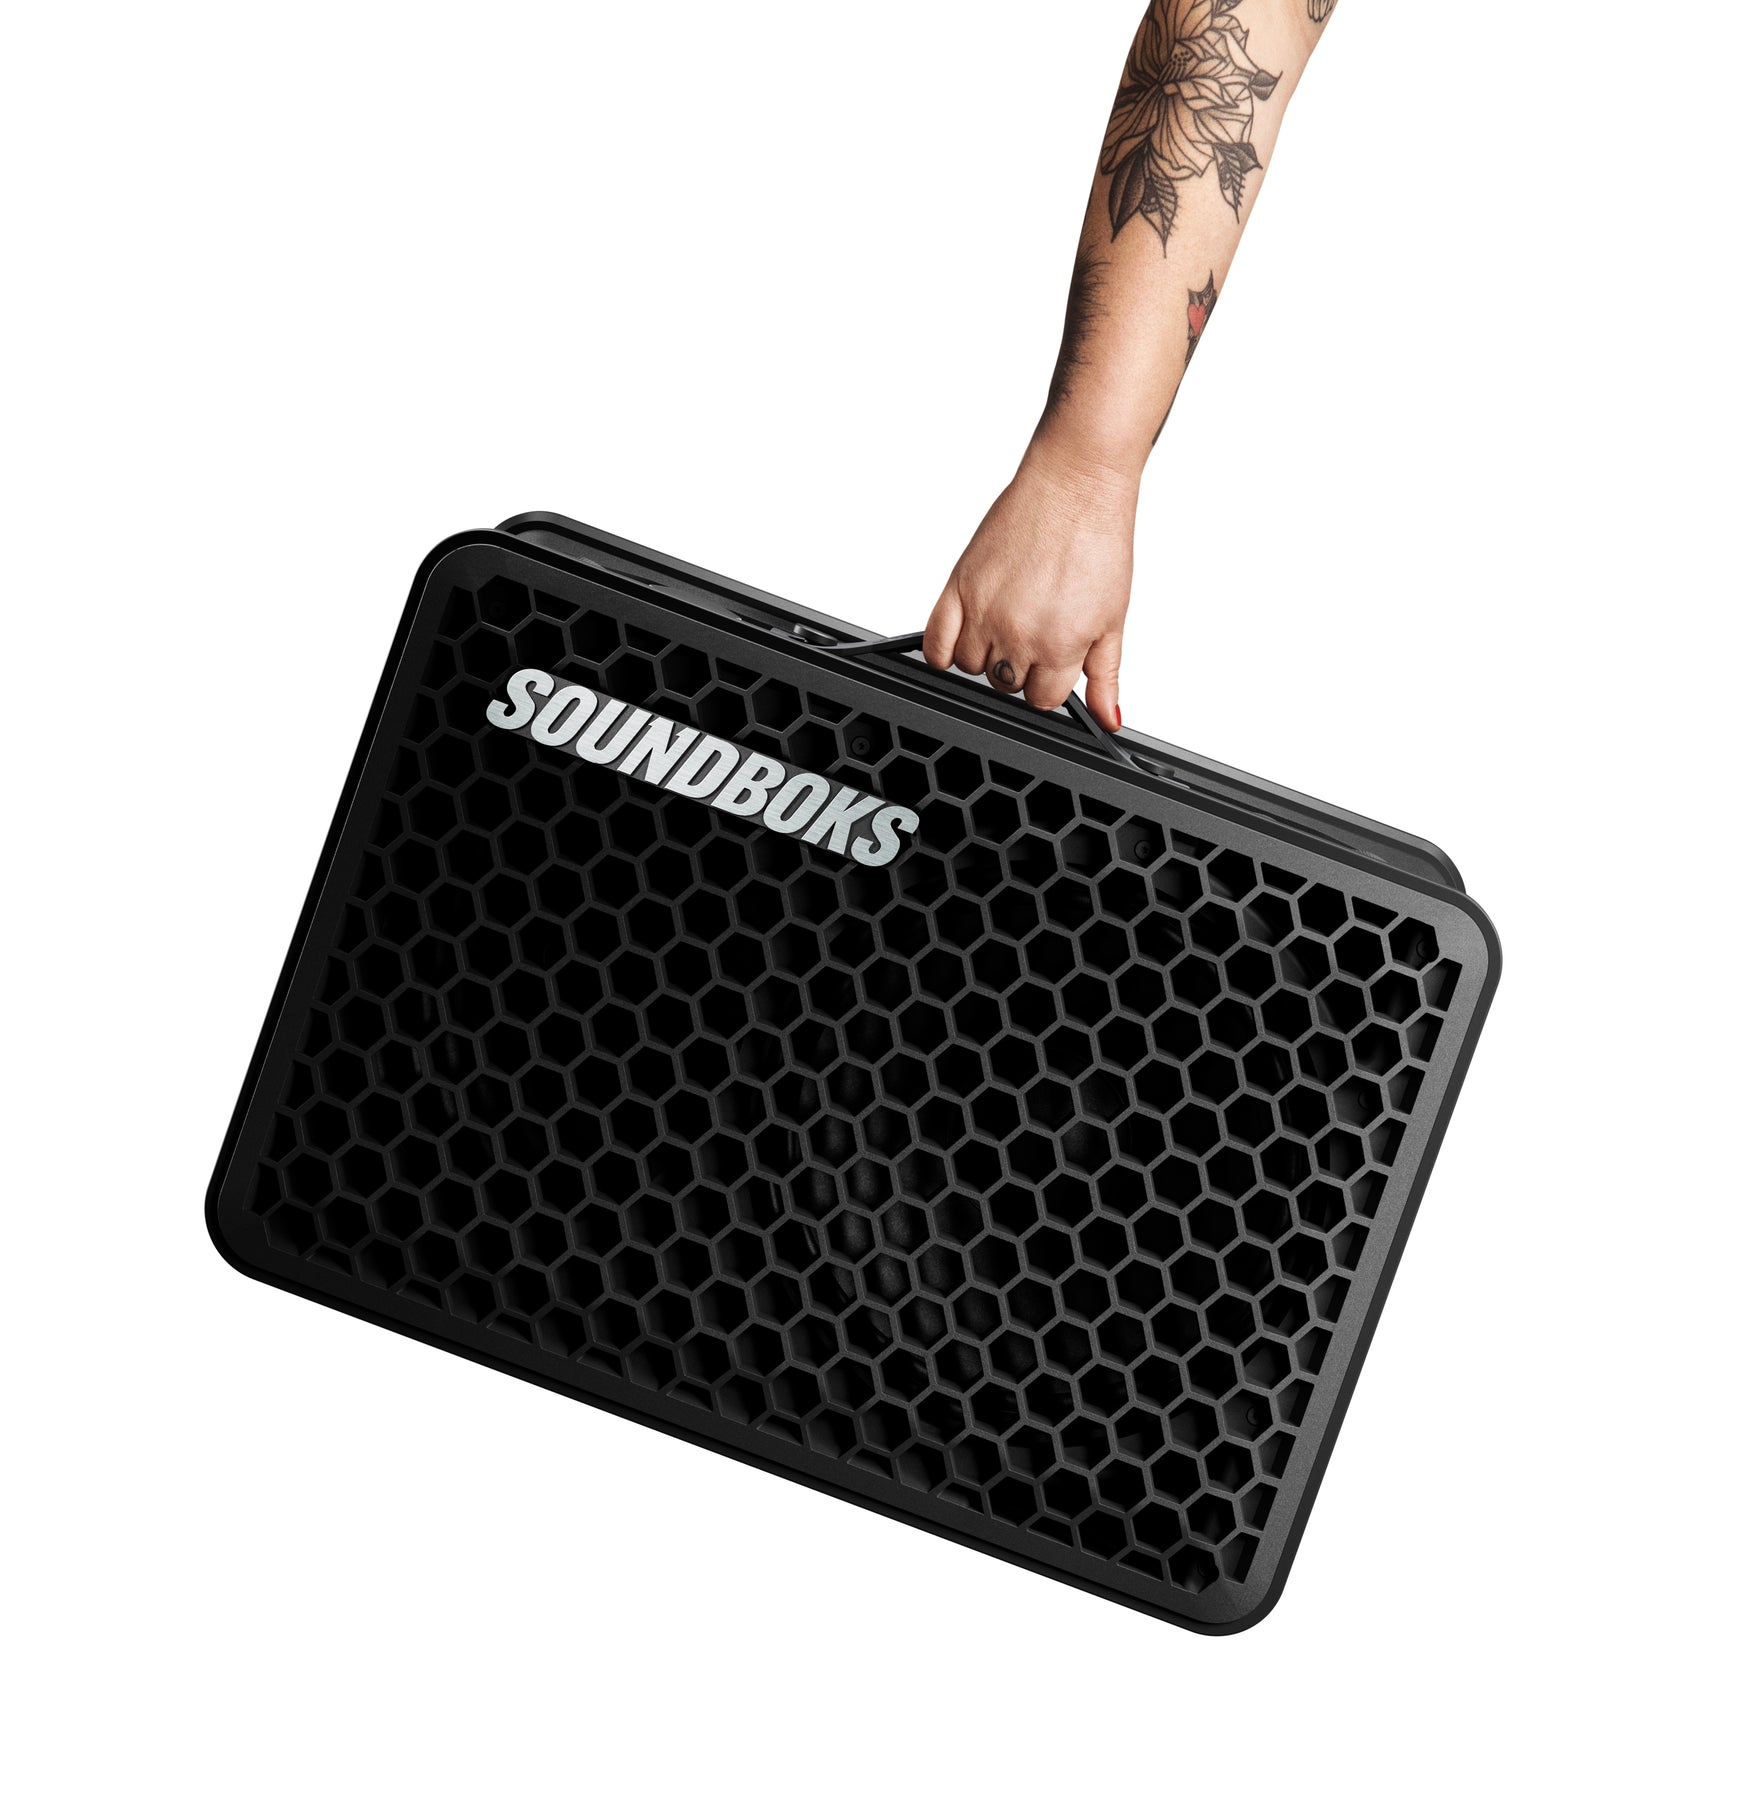 Soundboks Go: A portable boombox with a wireless focus